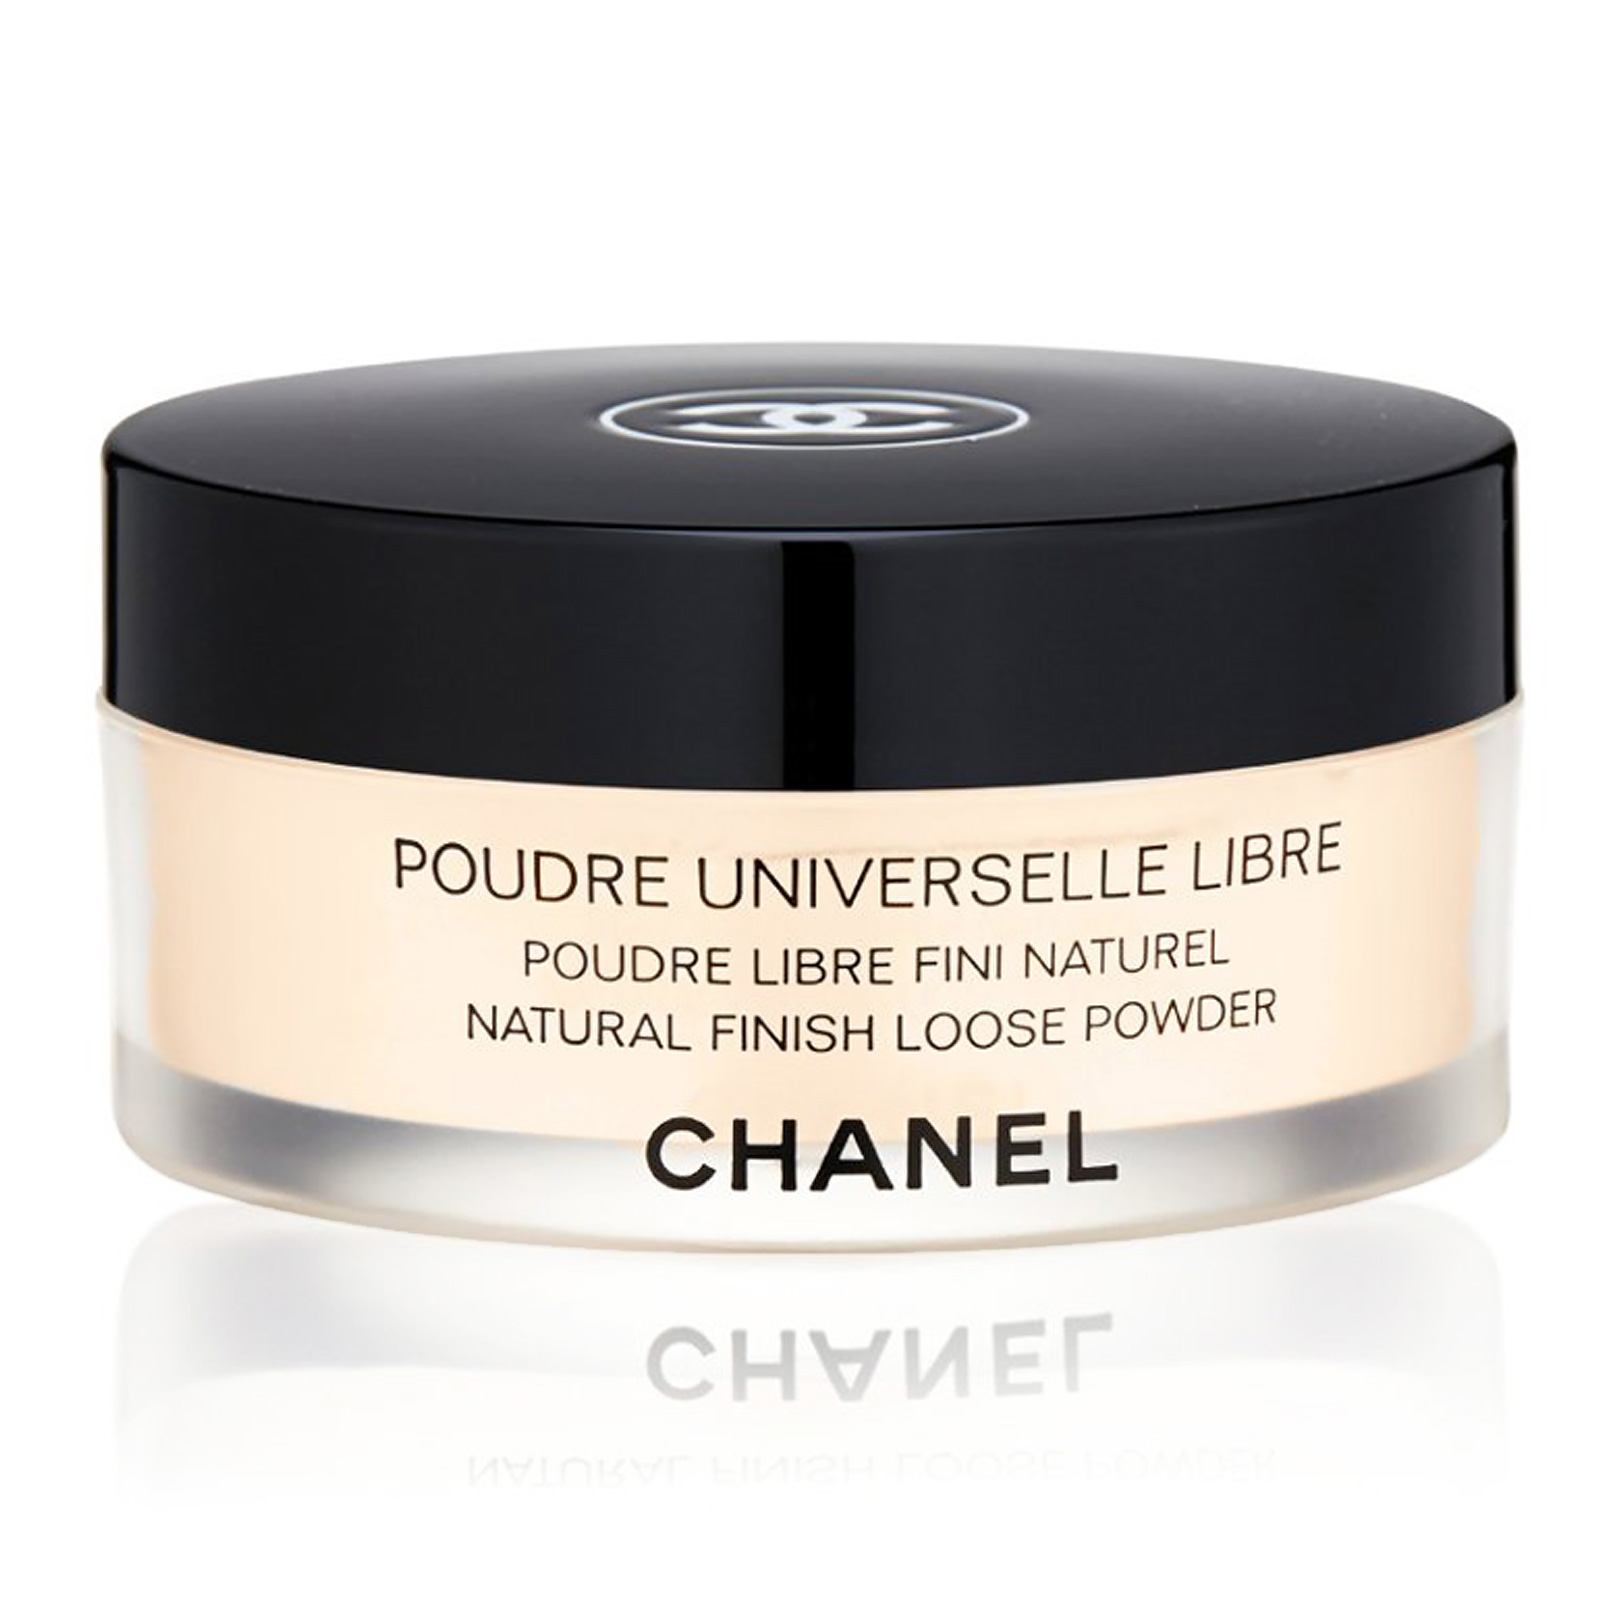 Chanel Poudre Universelle Libre Natural Finish Loose Powder30 g 1